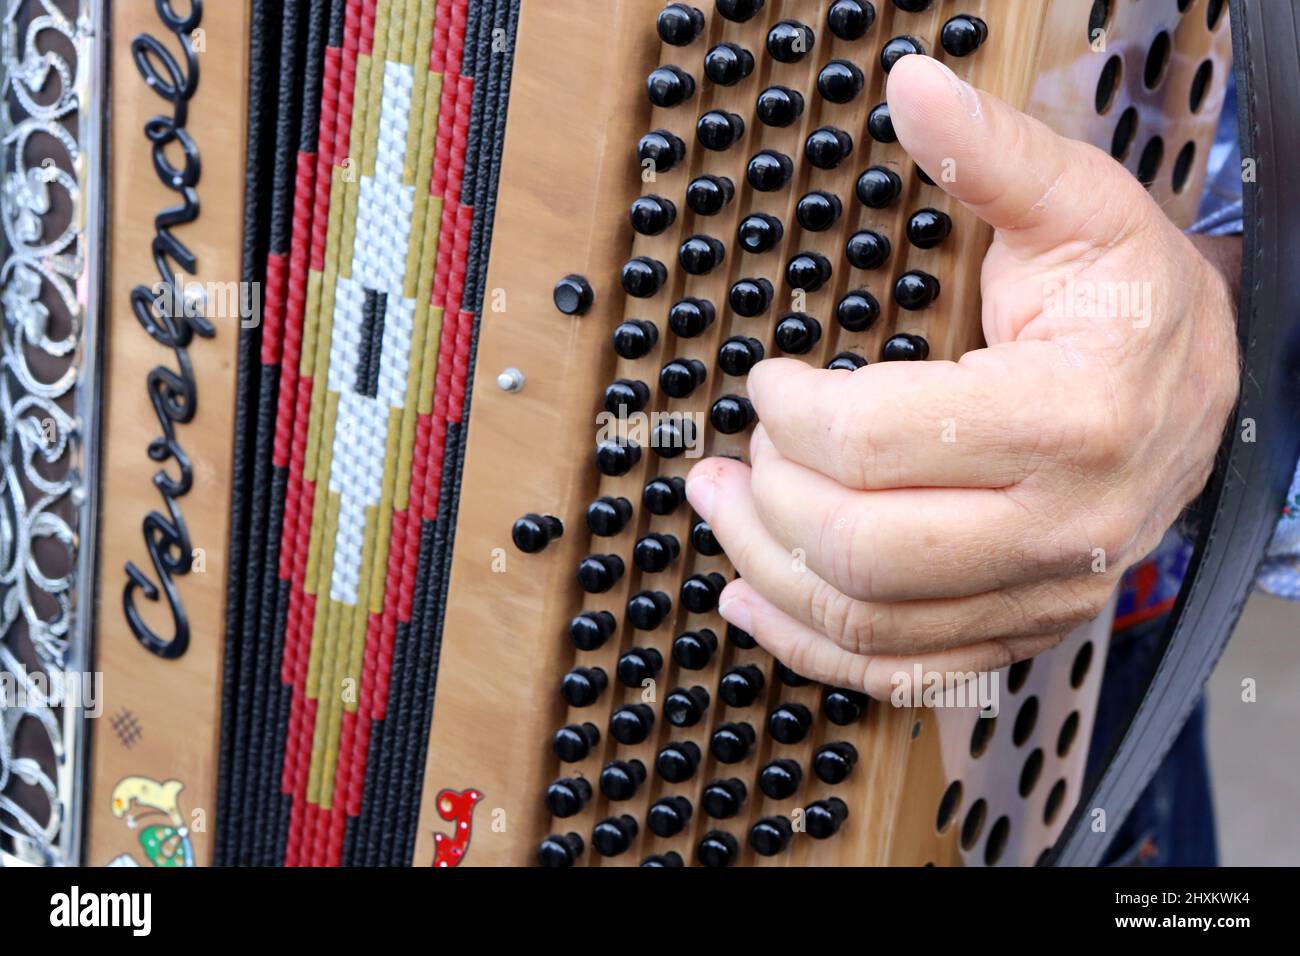 Accordeon High Resolution Stock Photography and Images - Alamy